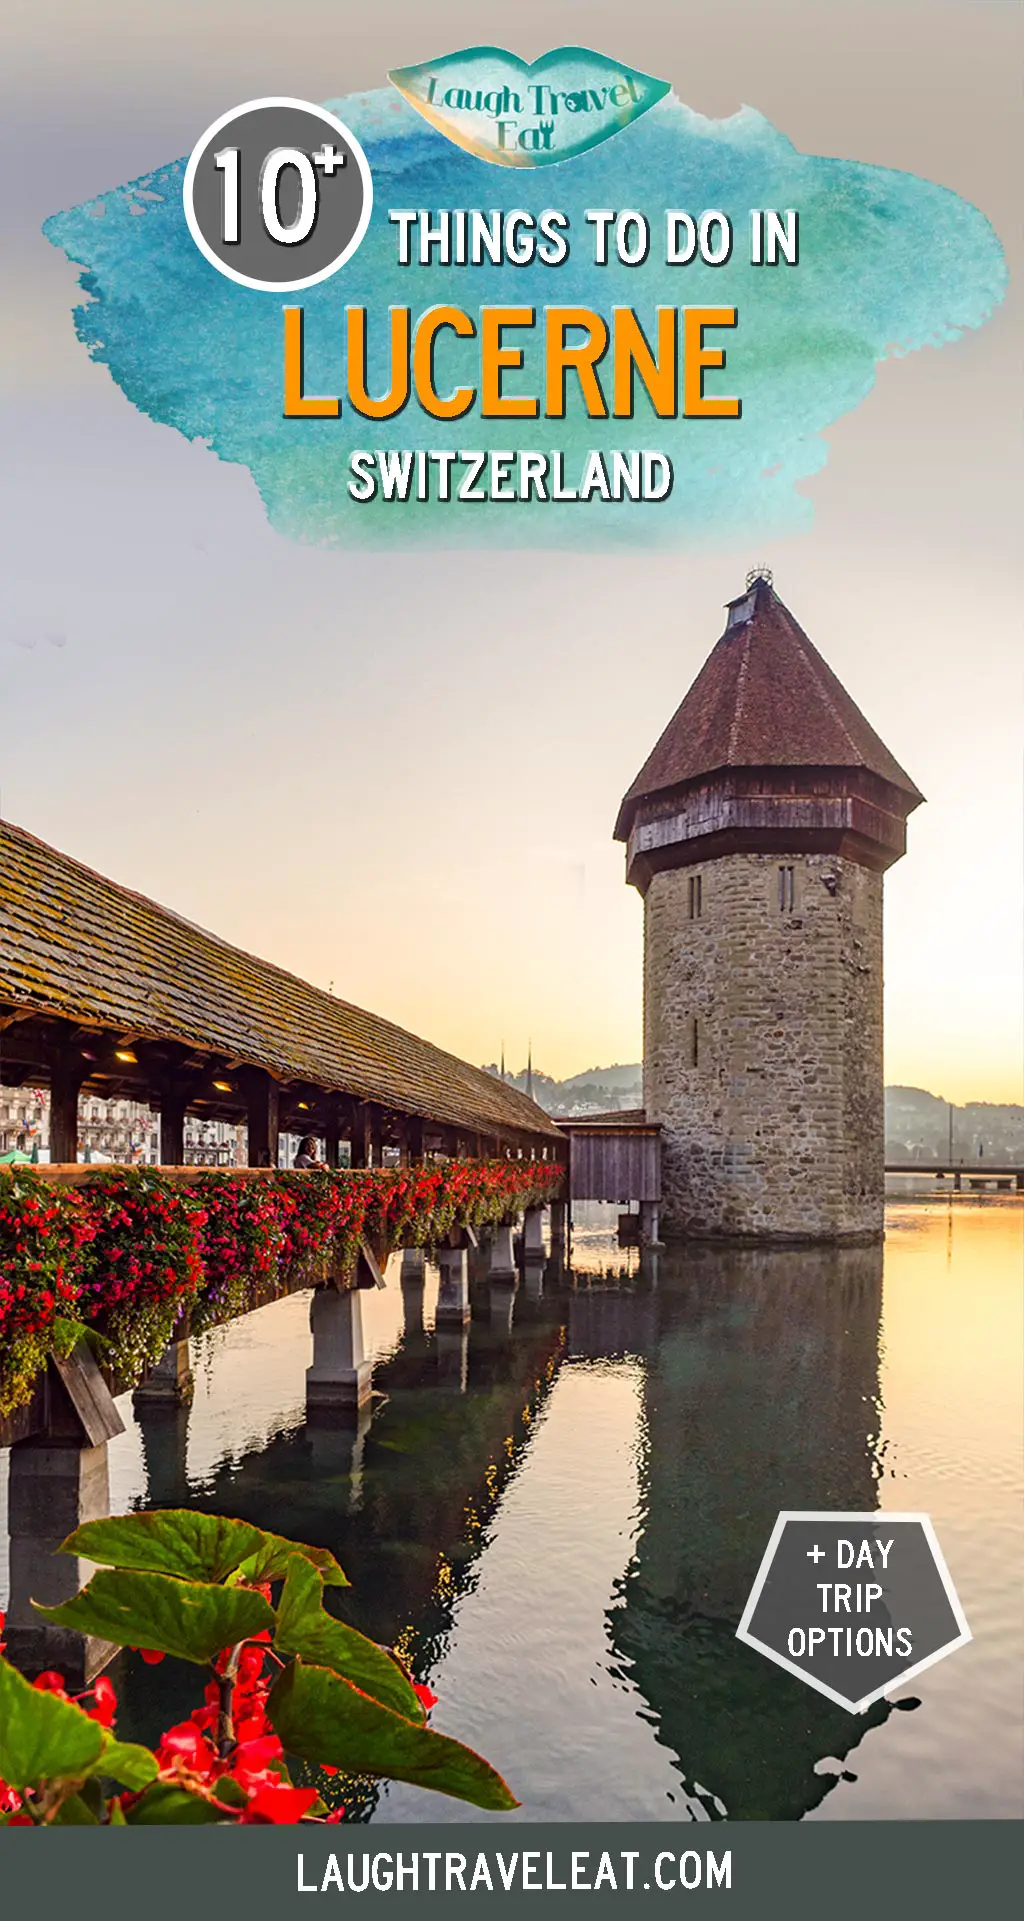 Lucerne is a historic city in the center of Switzerland on the River Reuss. There is a certain old time charm that lingers in its cobblestone streets and intricate painted medieval buildings that summon a sense of wanderlust like no other. Here is a guide to Lucerne and what to do around the city: #Lucerne #Switzerland